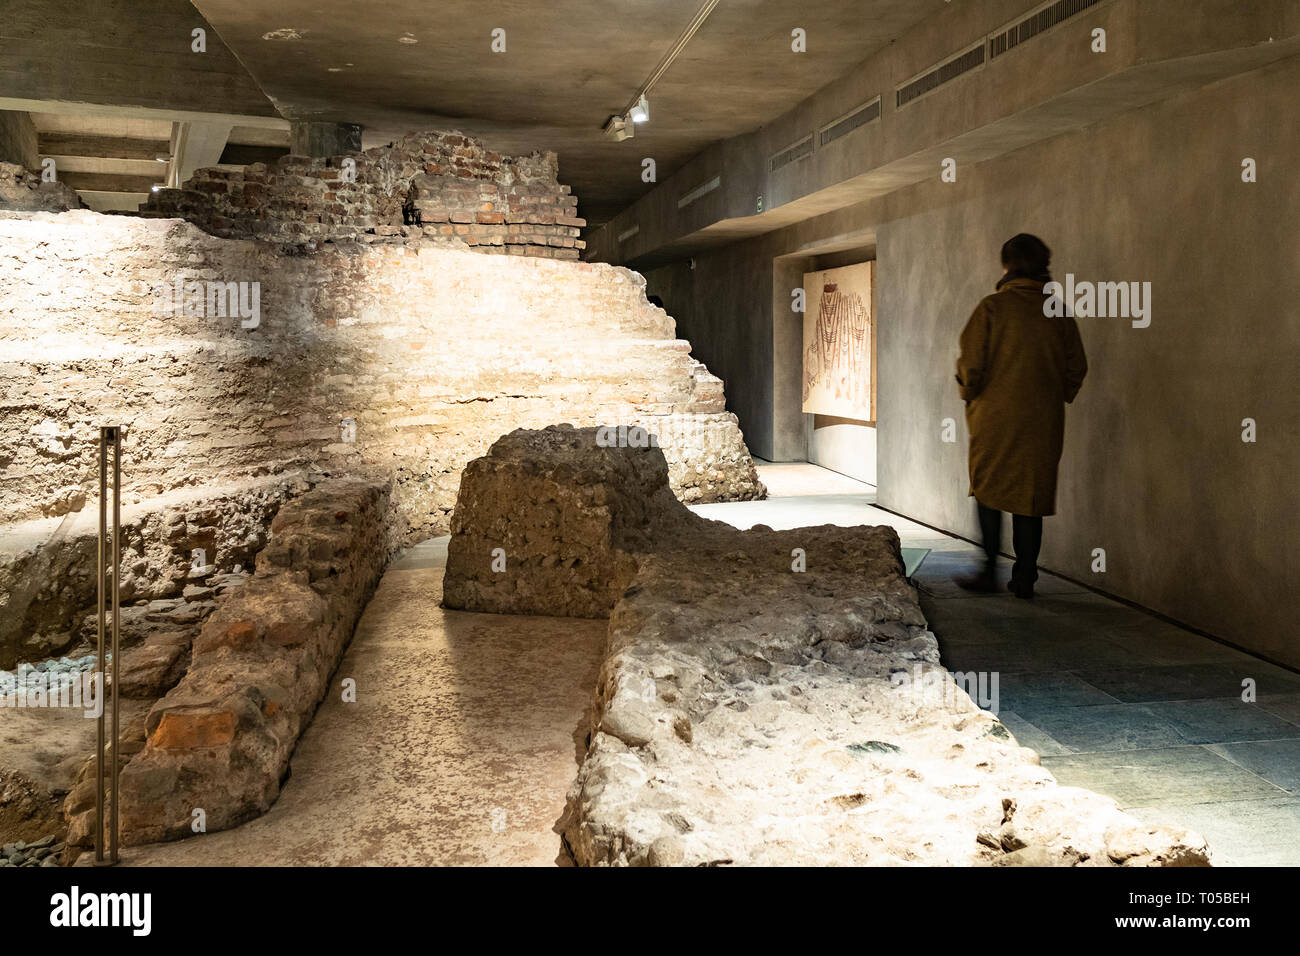 MILAN, ITALY - FEBRUARY 24, 2019: woman in archaeological area of ruined ancient baptistery and church of San Giovanni alle Fonti and Santa Tecla in c Stock Photo